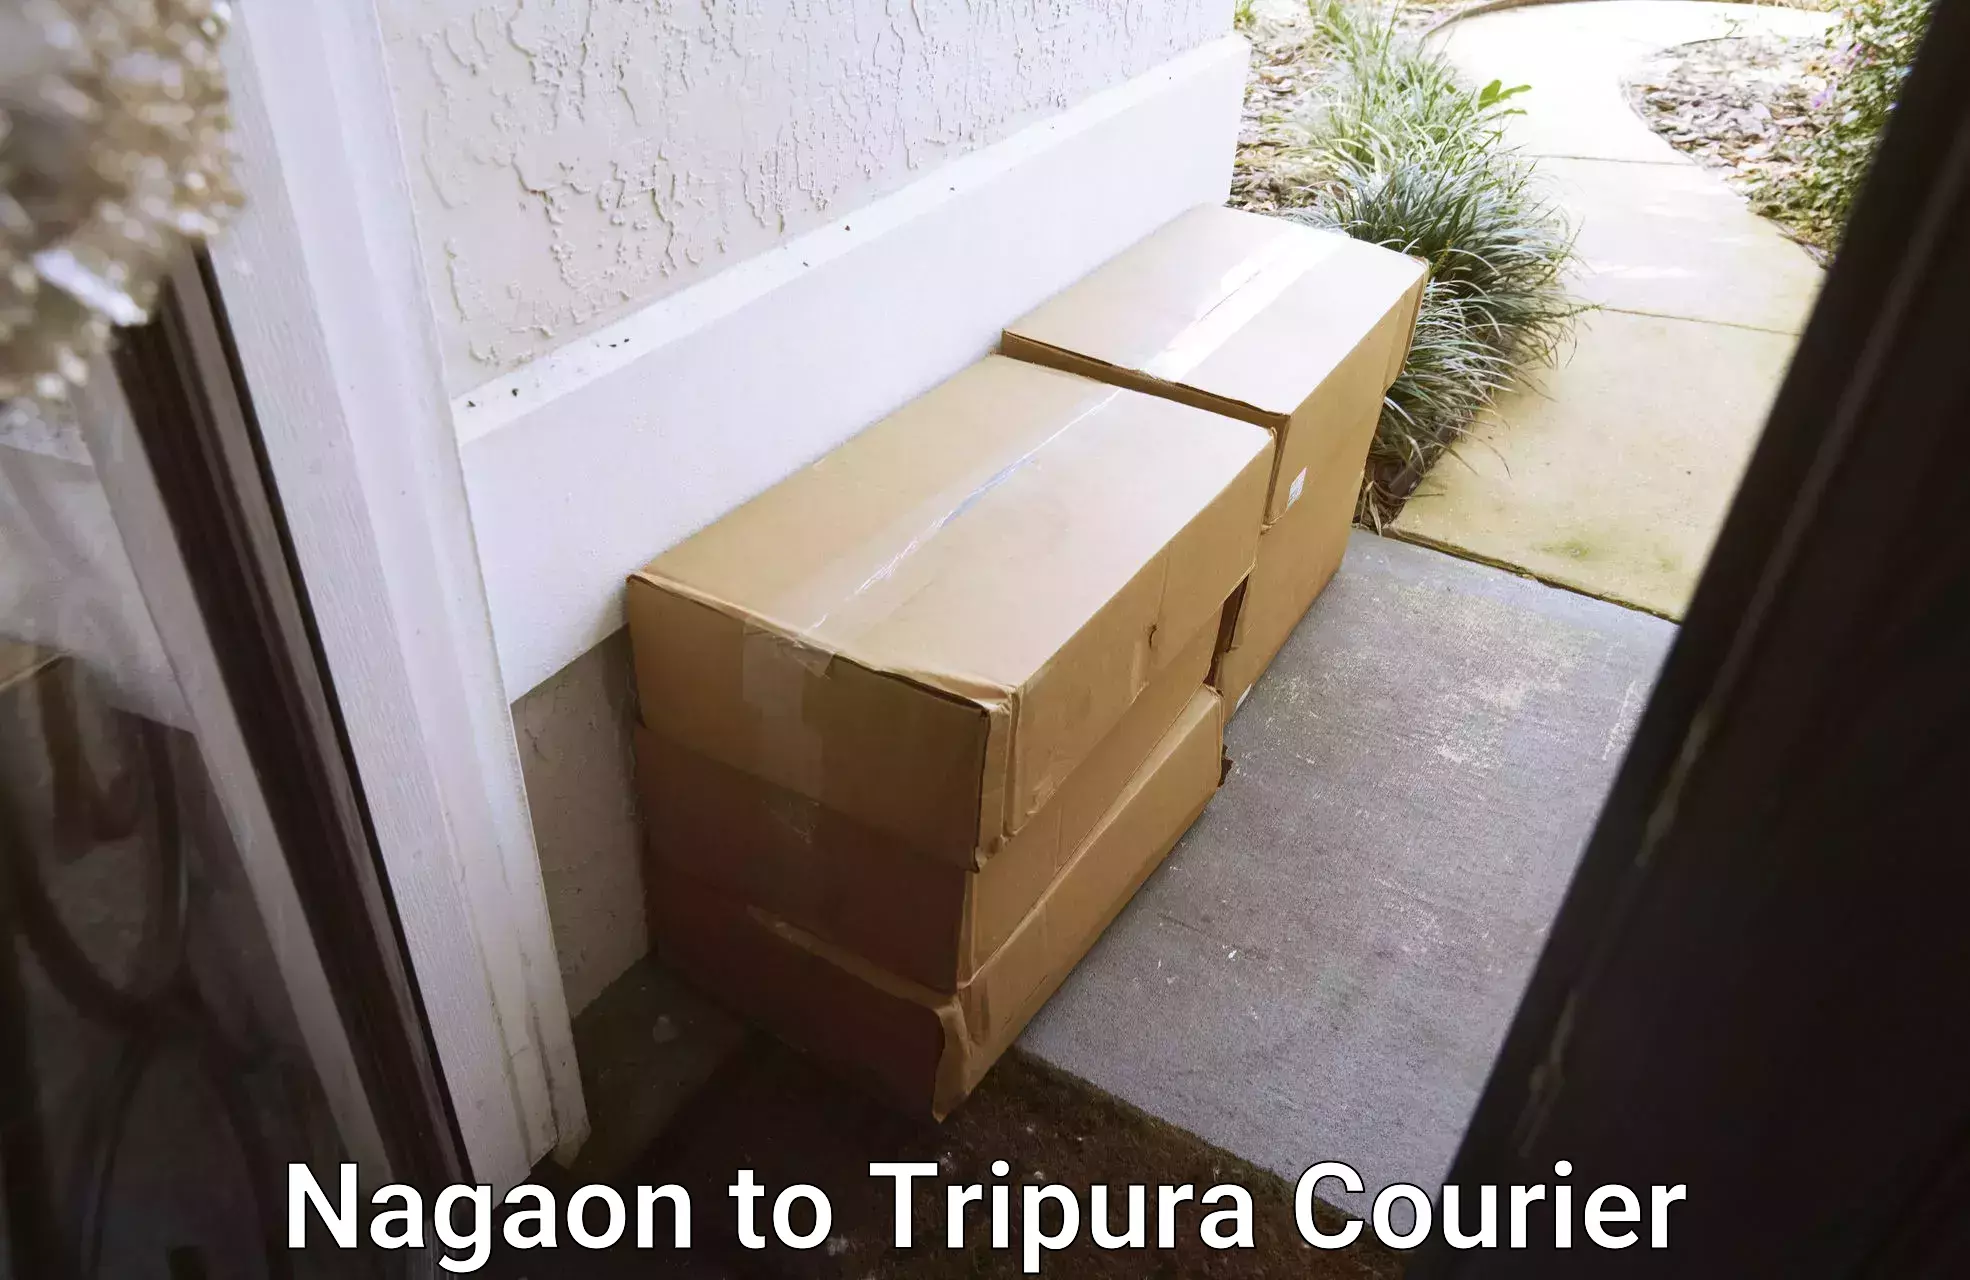 On-call courier service Nagaon to Tripura